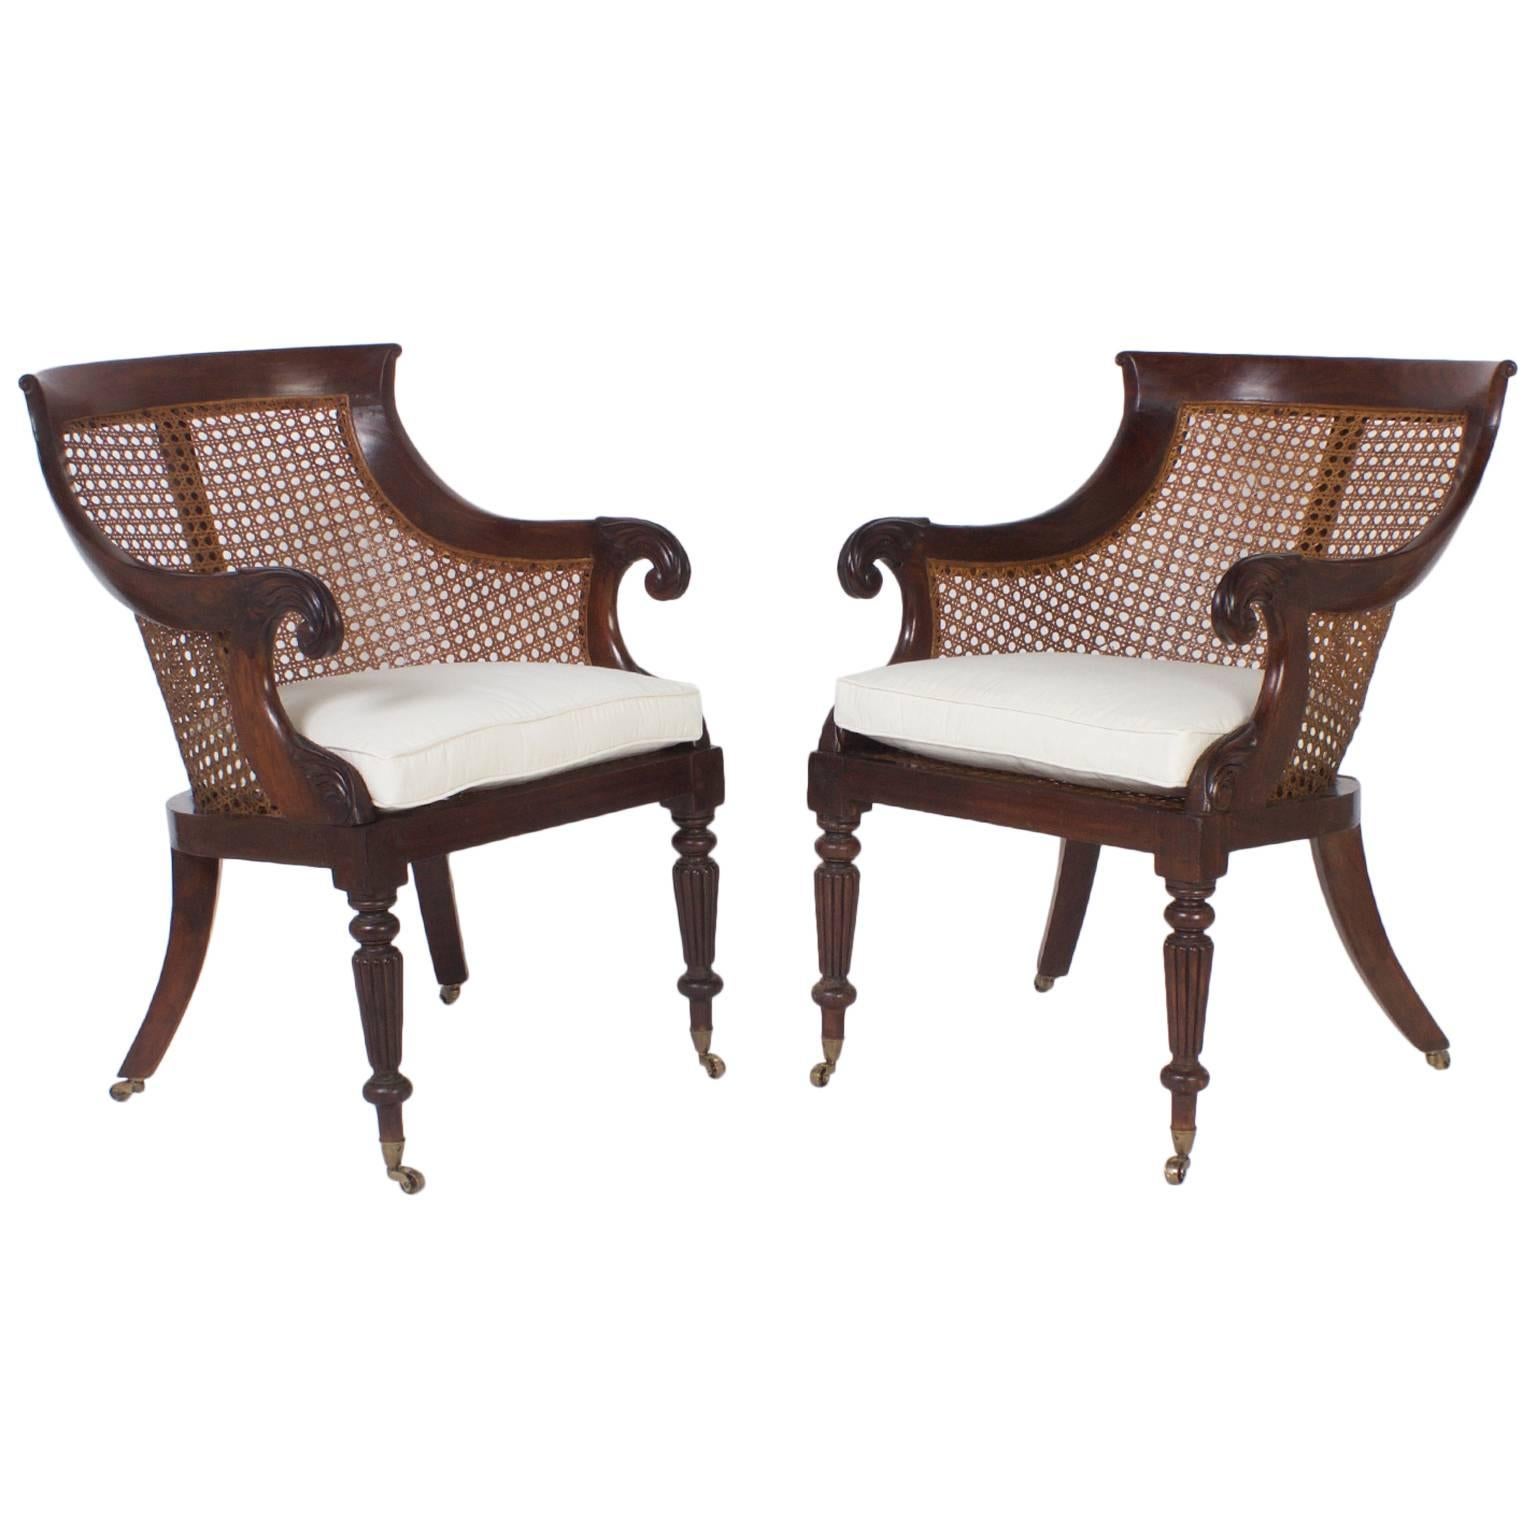 Pair of Regency Style Cane Library Chairs